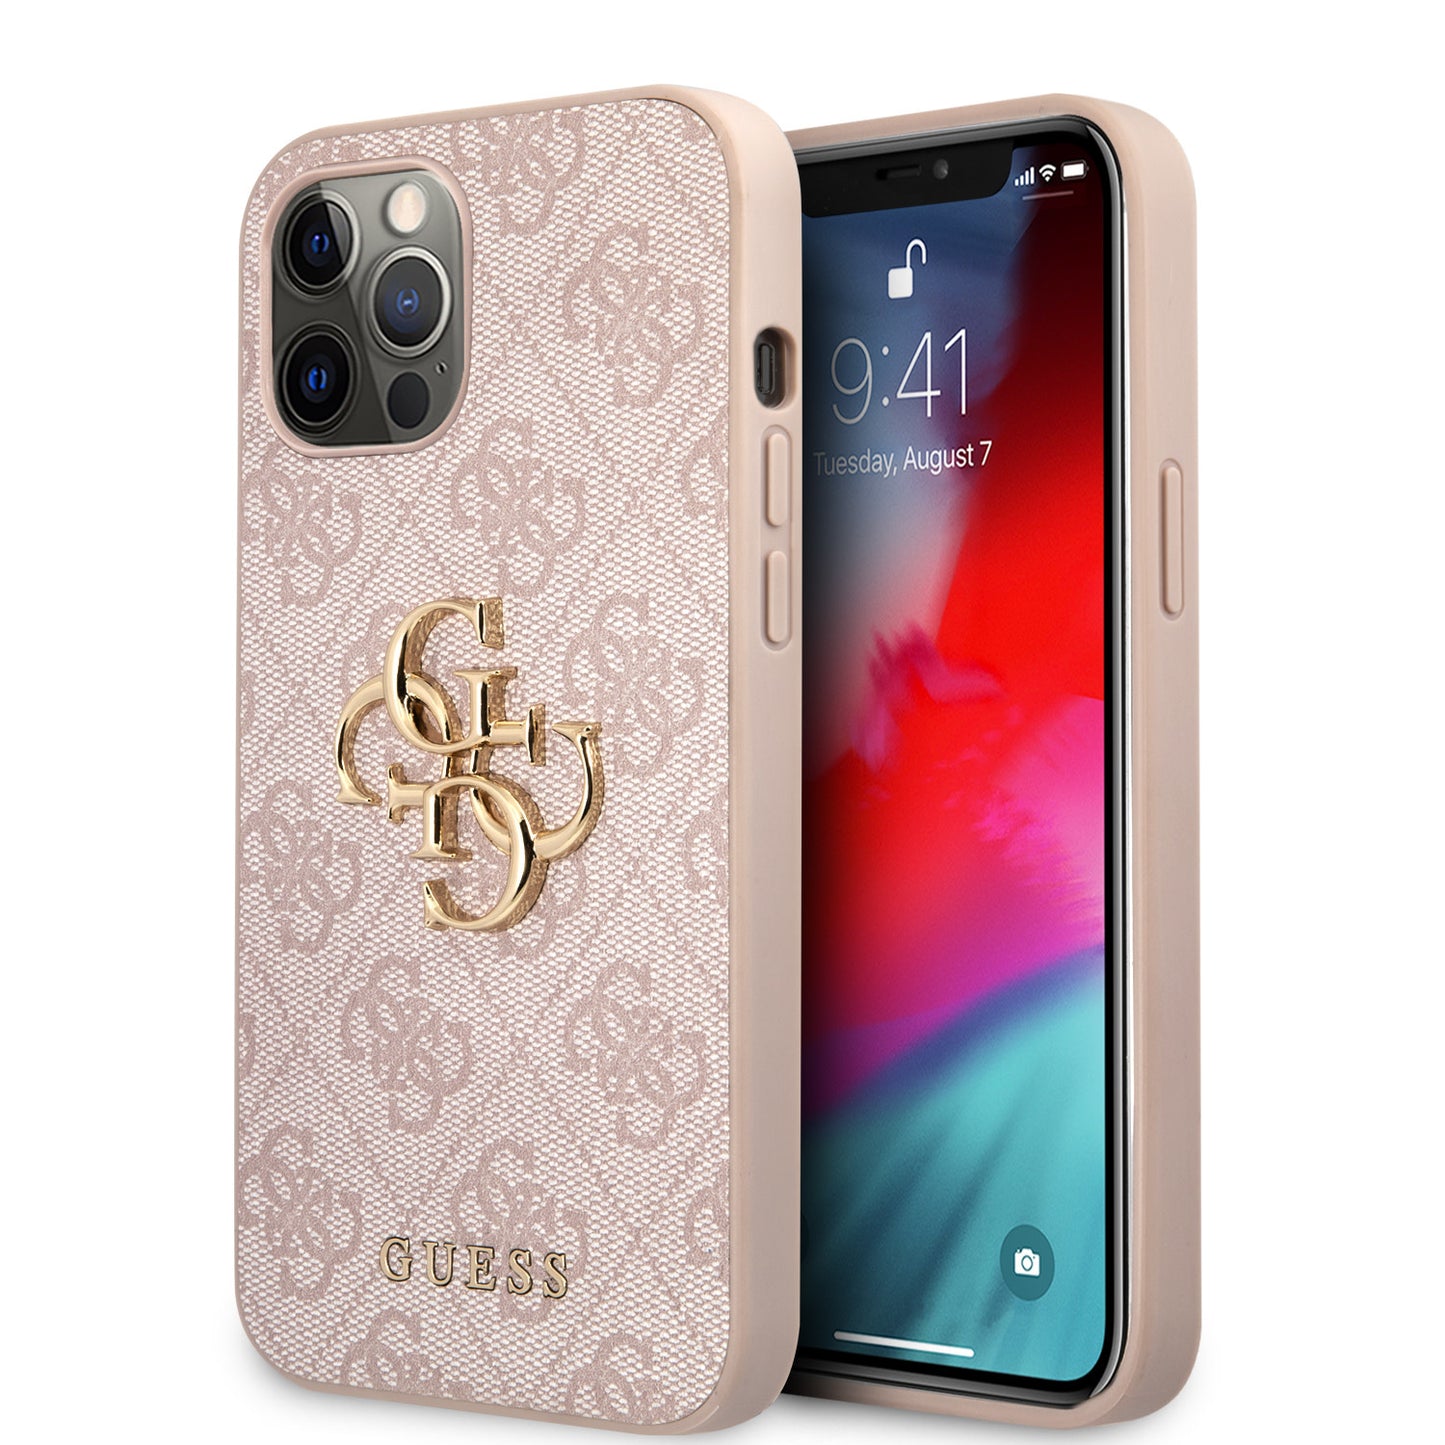 Guess iPhone 12 PRO MAX Backcover - Gold 4G Logo - Roze